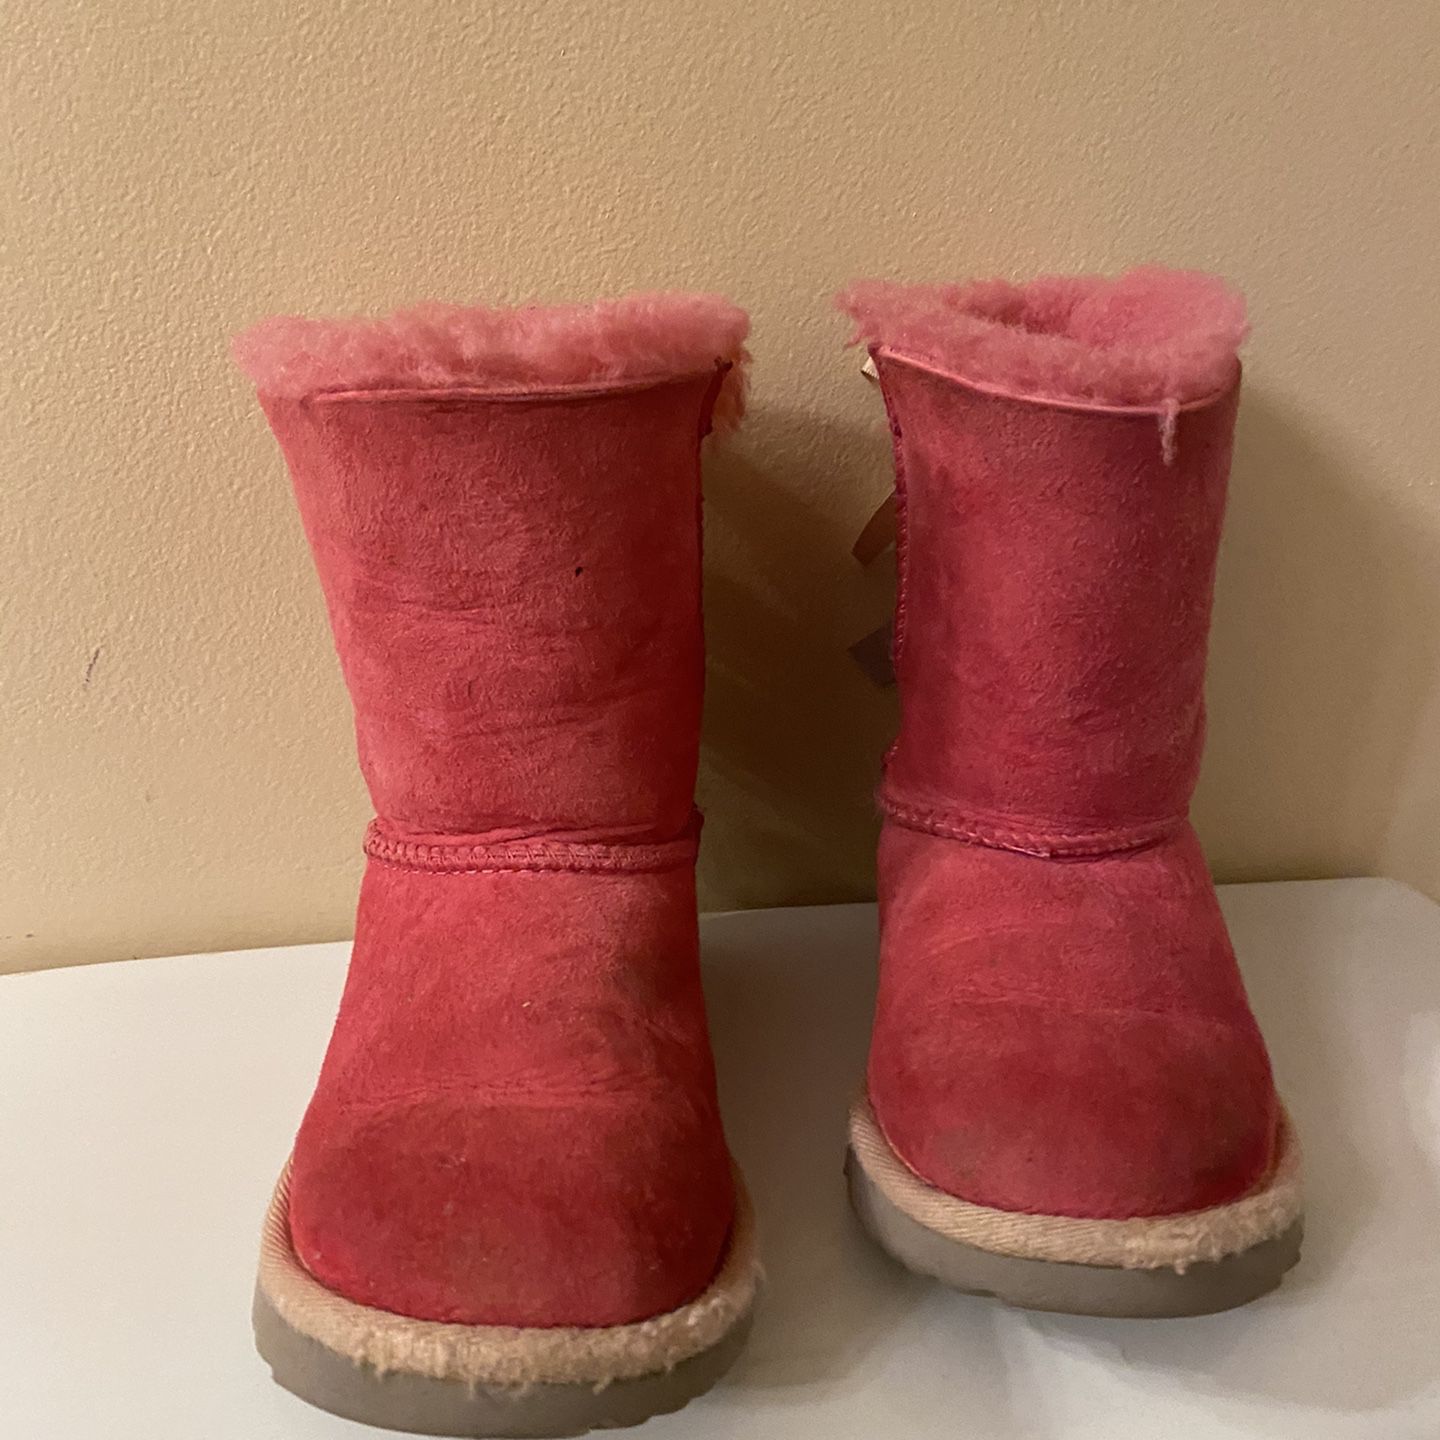 Girls UGG Boots - Bailey Bow Size 12 Pink and Grey